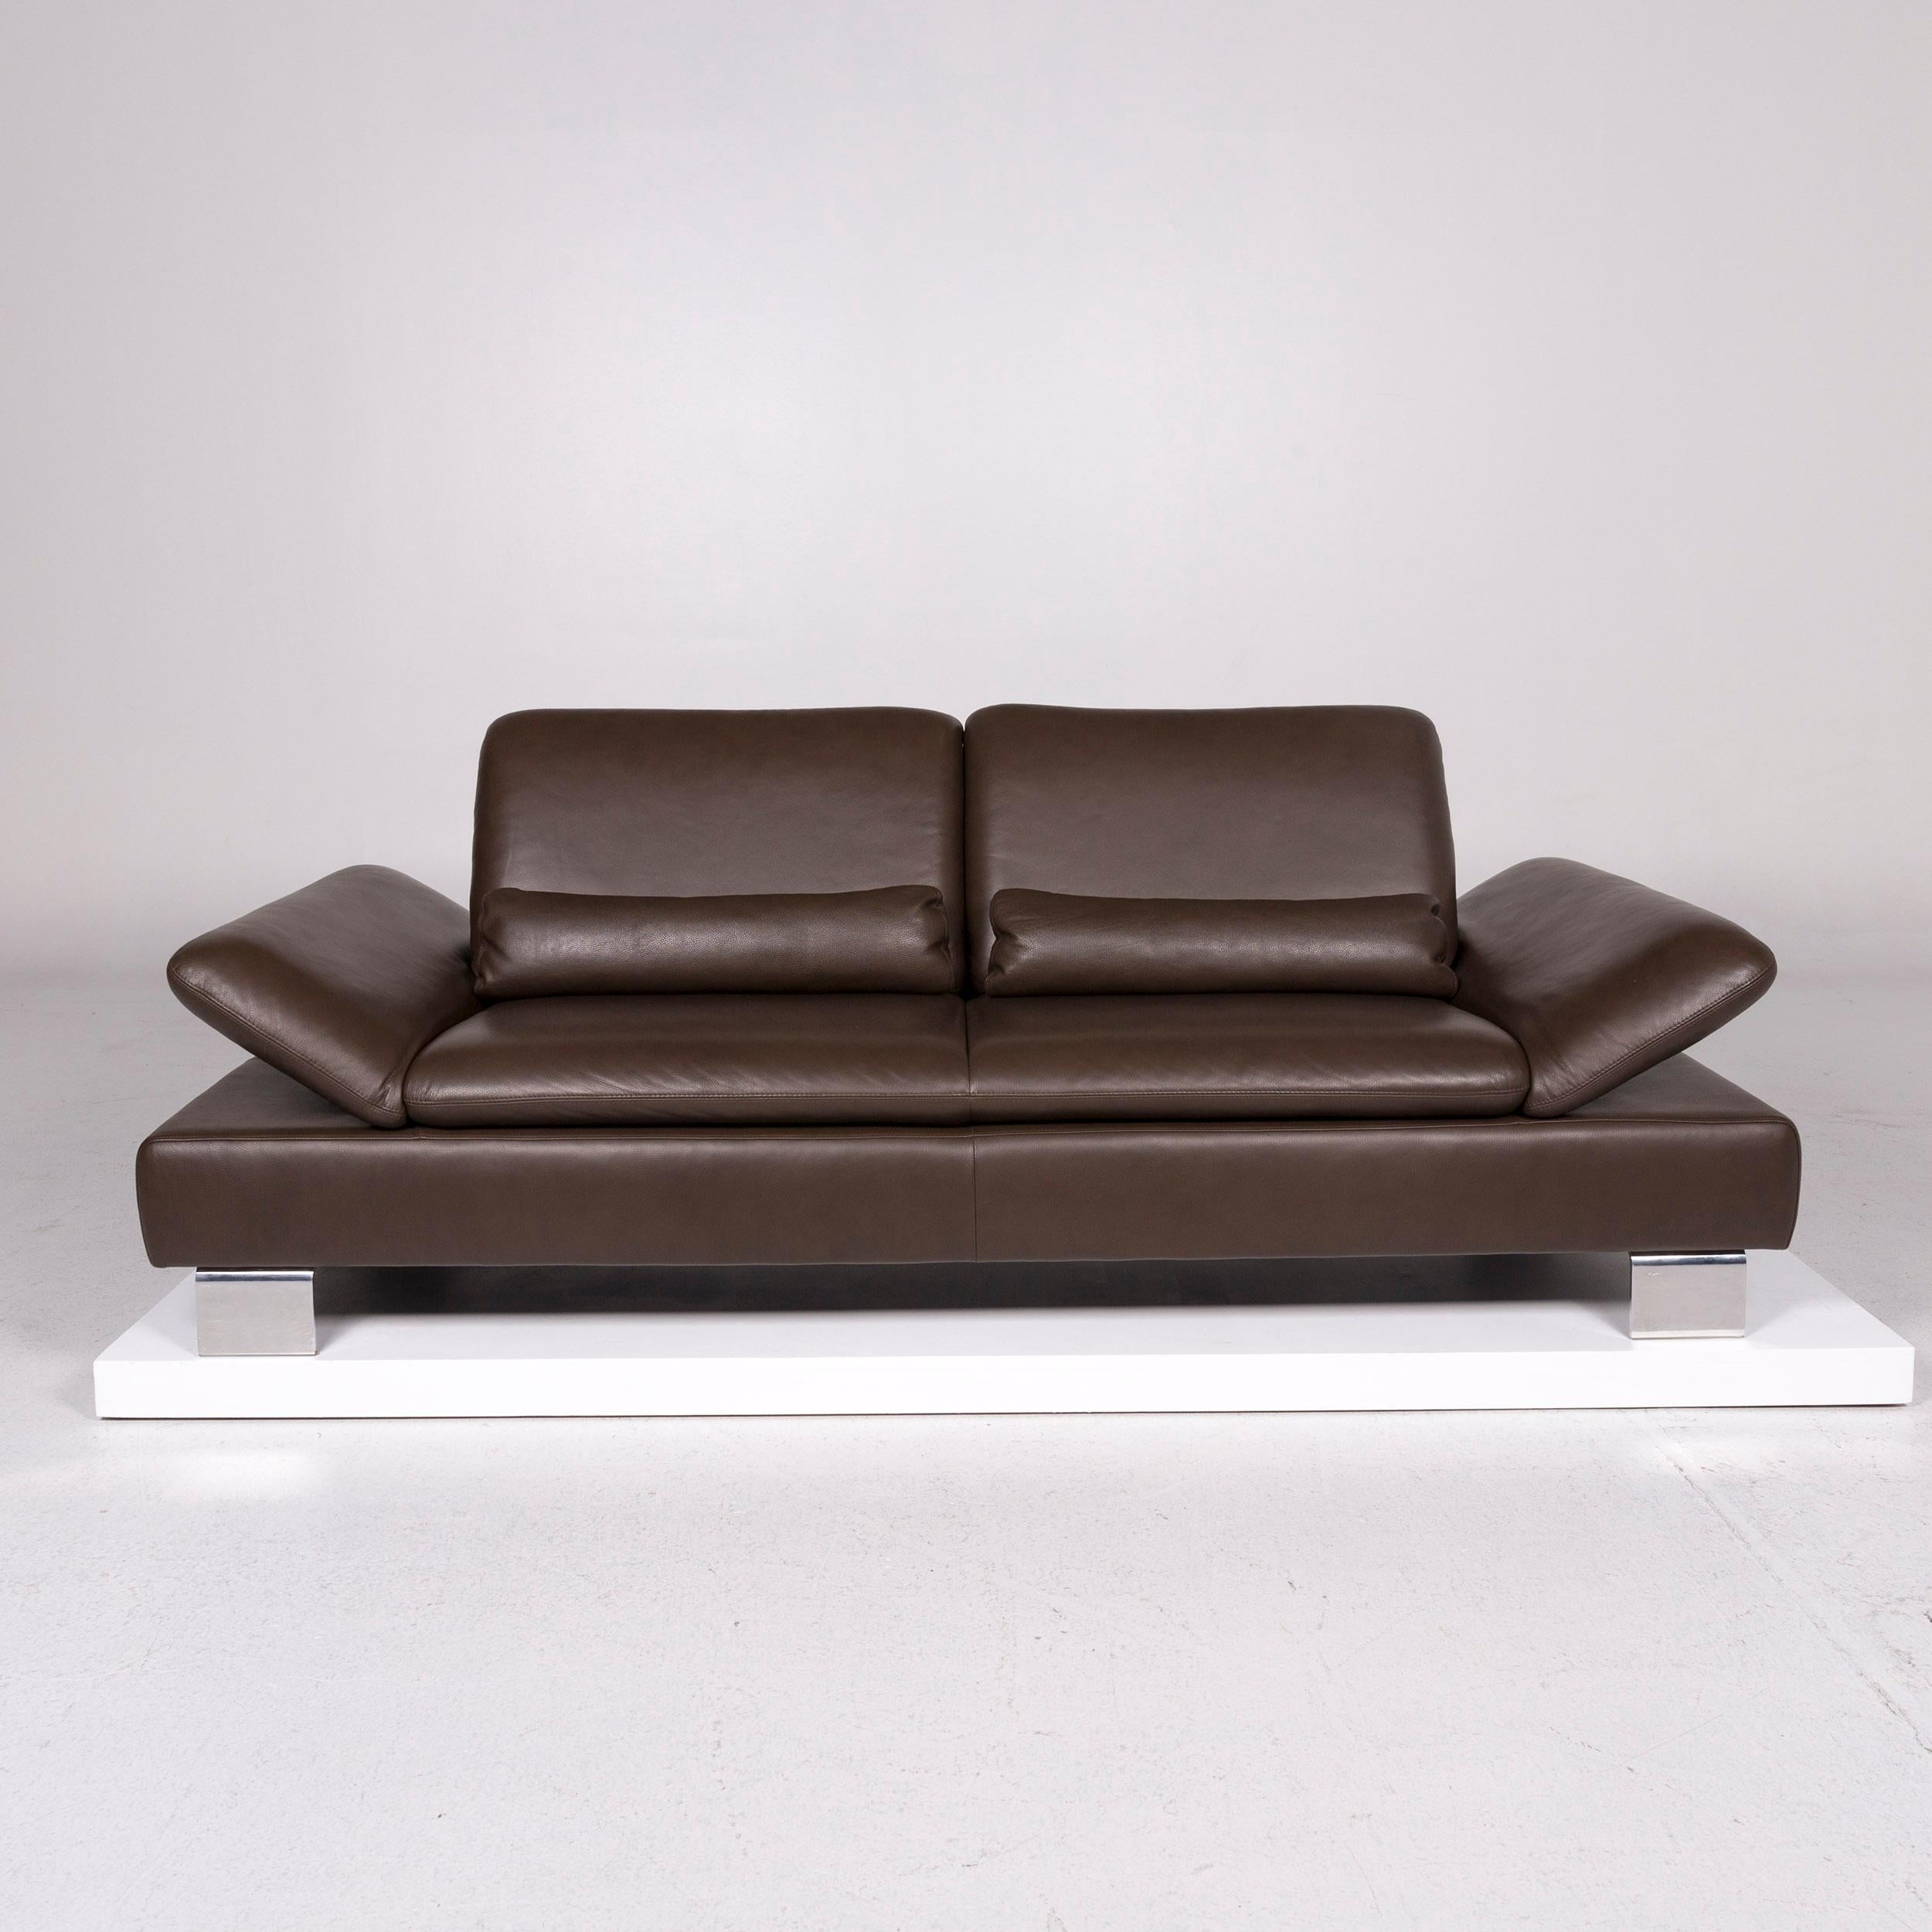 We bring to you a Willi Schillig leather sofa set brown dark brown 1x three-seat 1x stool.


 Product measurements in centimeters:
 

 Depth 95
Width 229
Height 85
Seat-height 44
Rest-height 44
Seat-depth 42
Seat-width 155
Back-height